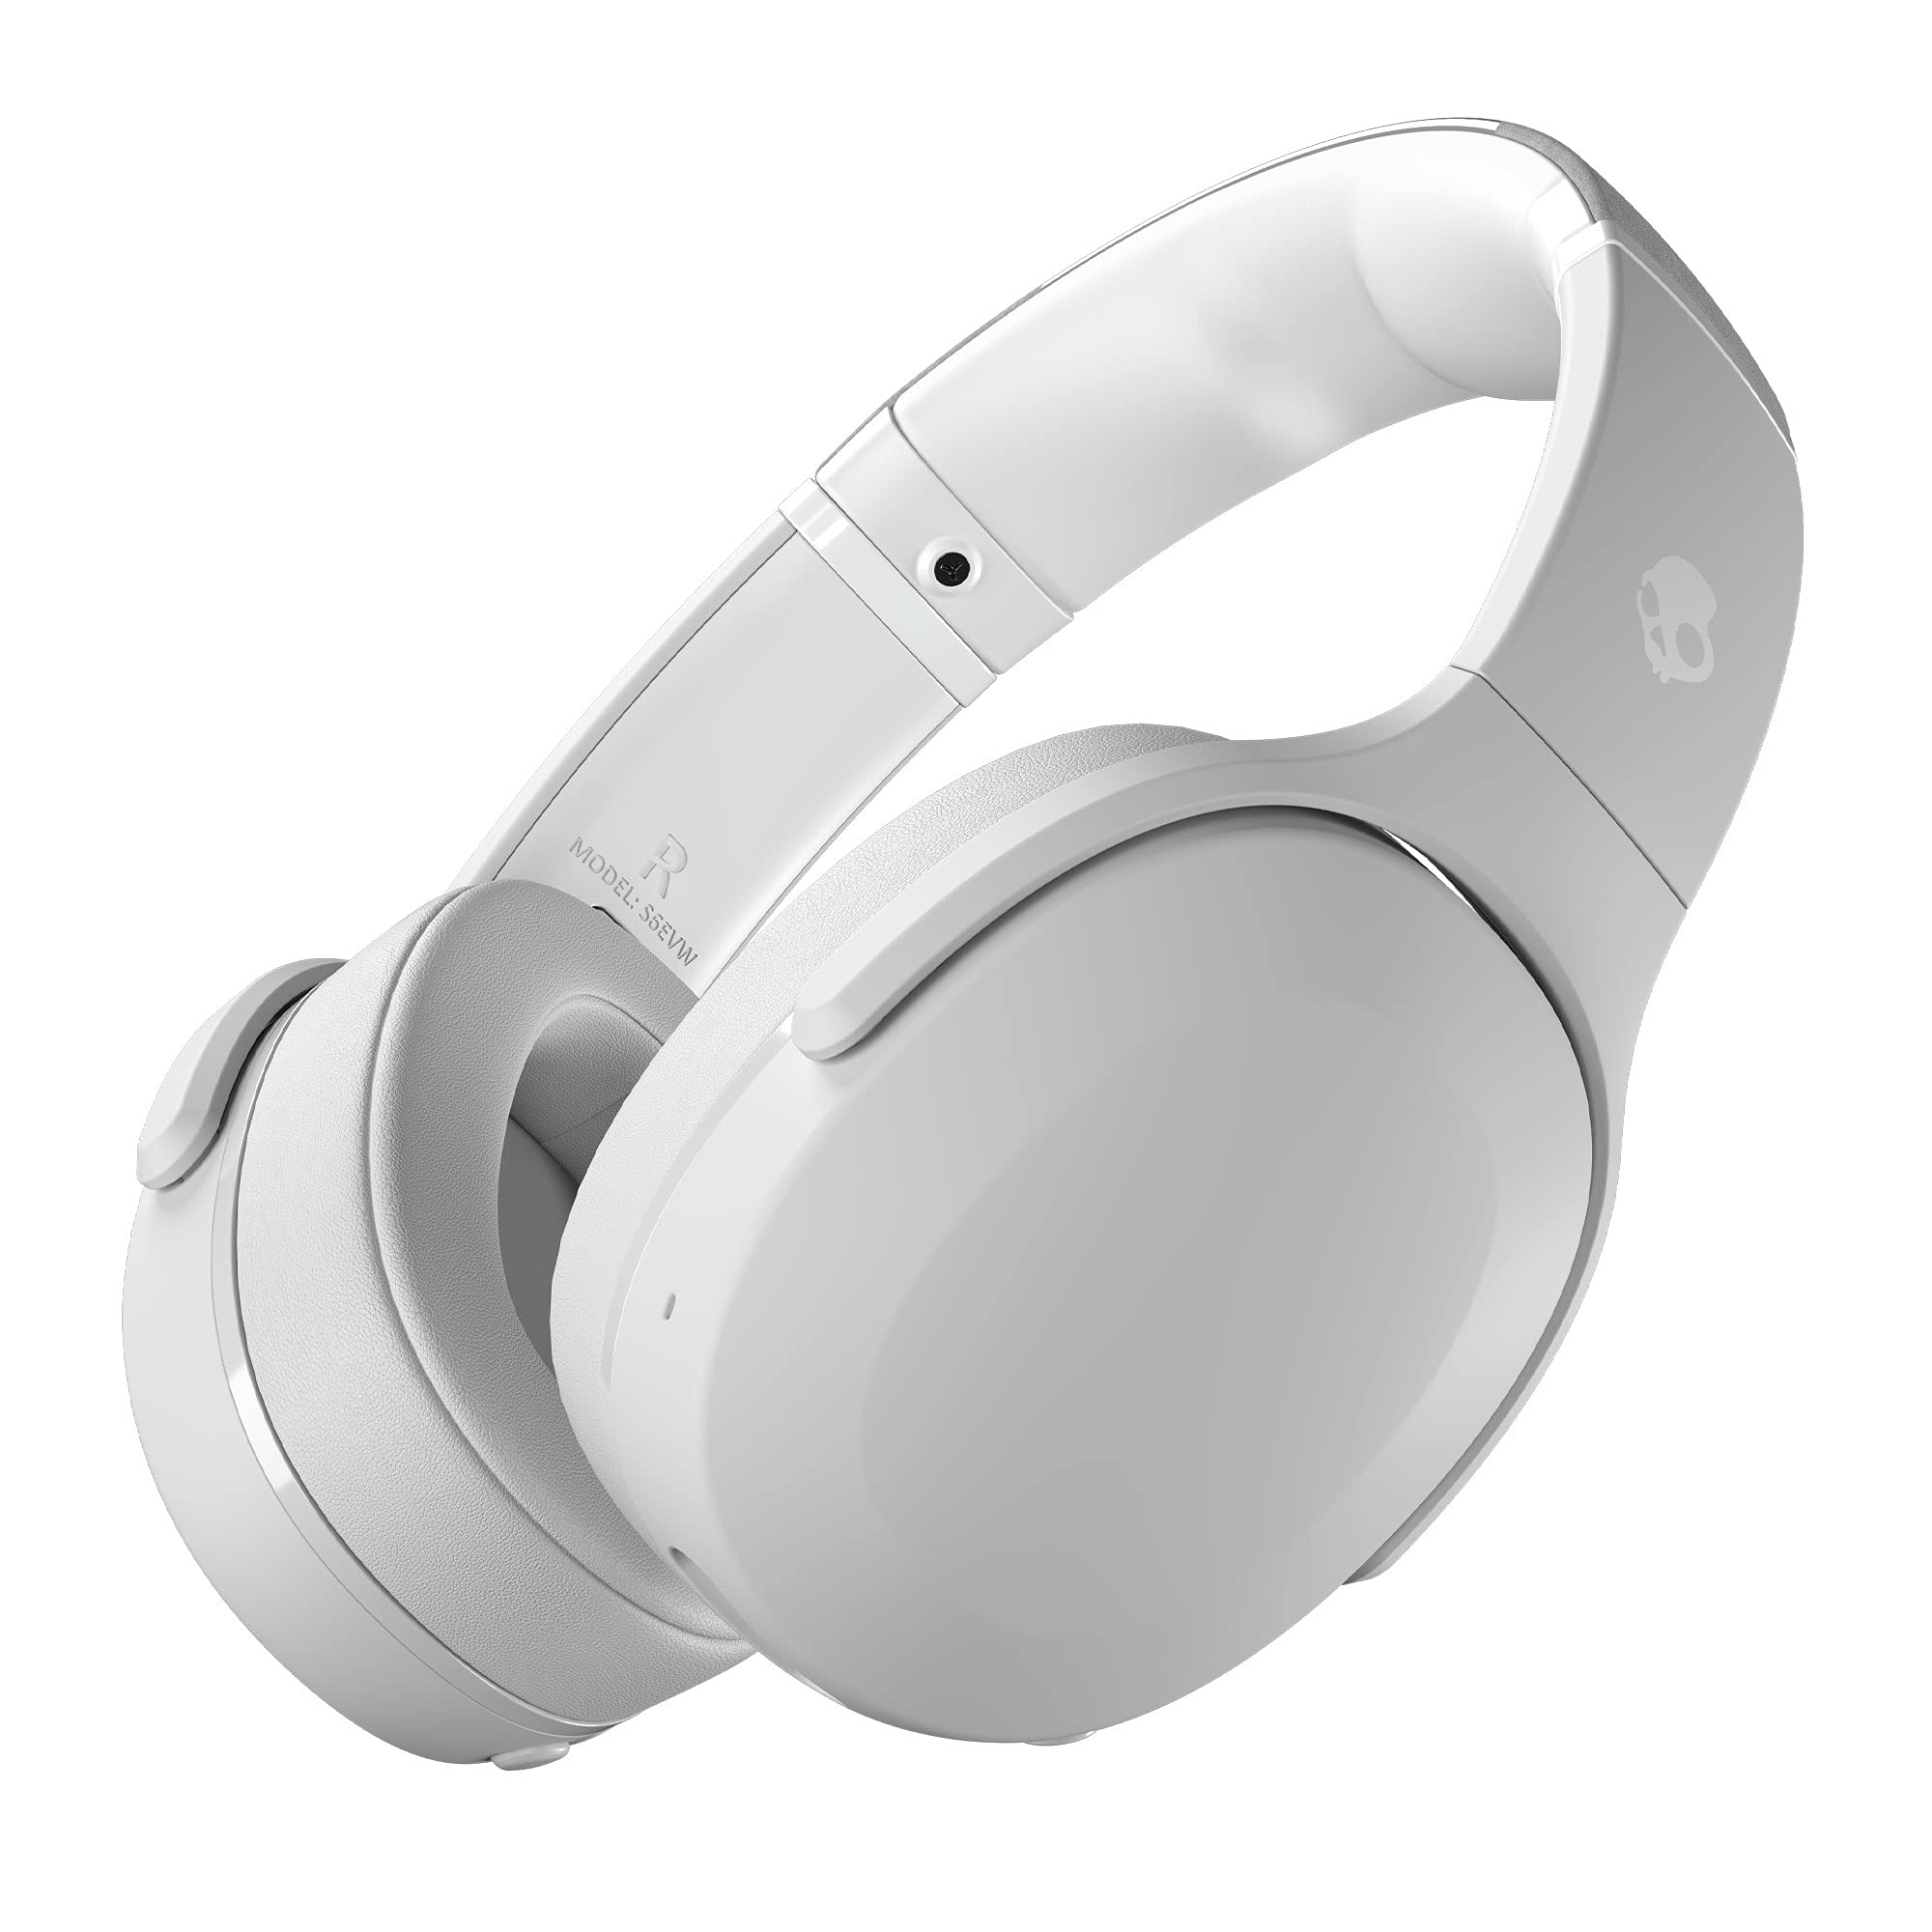 Looking to Buy Skullcandy Crusher ANC Headphones in 2023. Check Out These 10 Things First